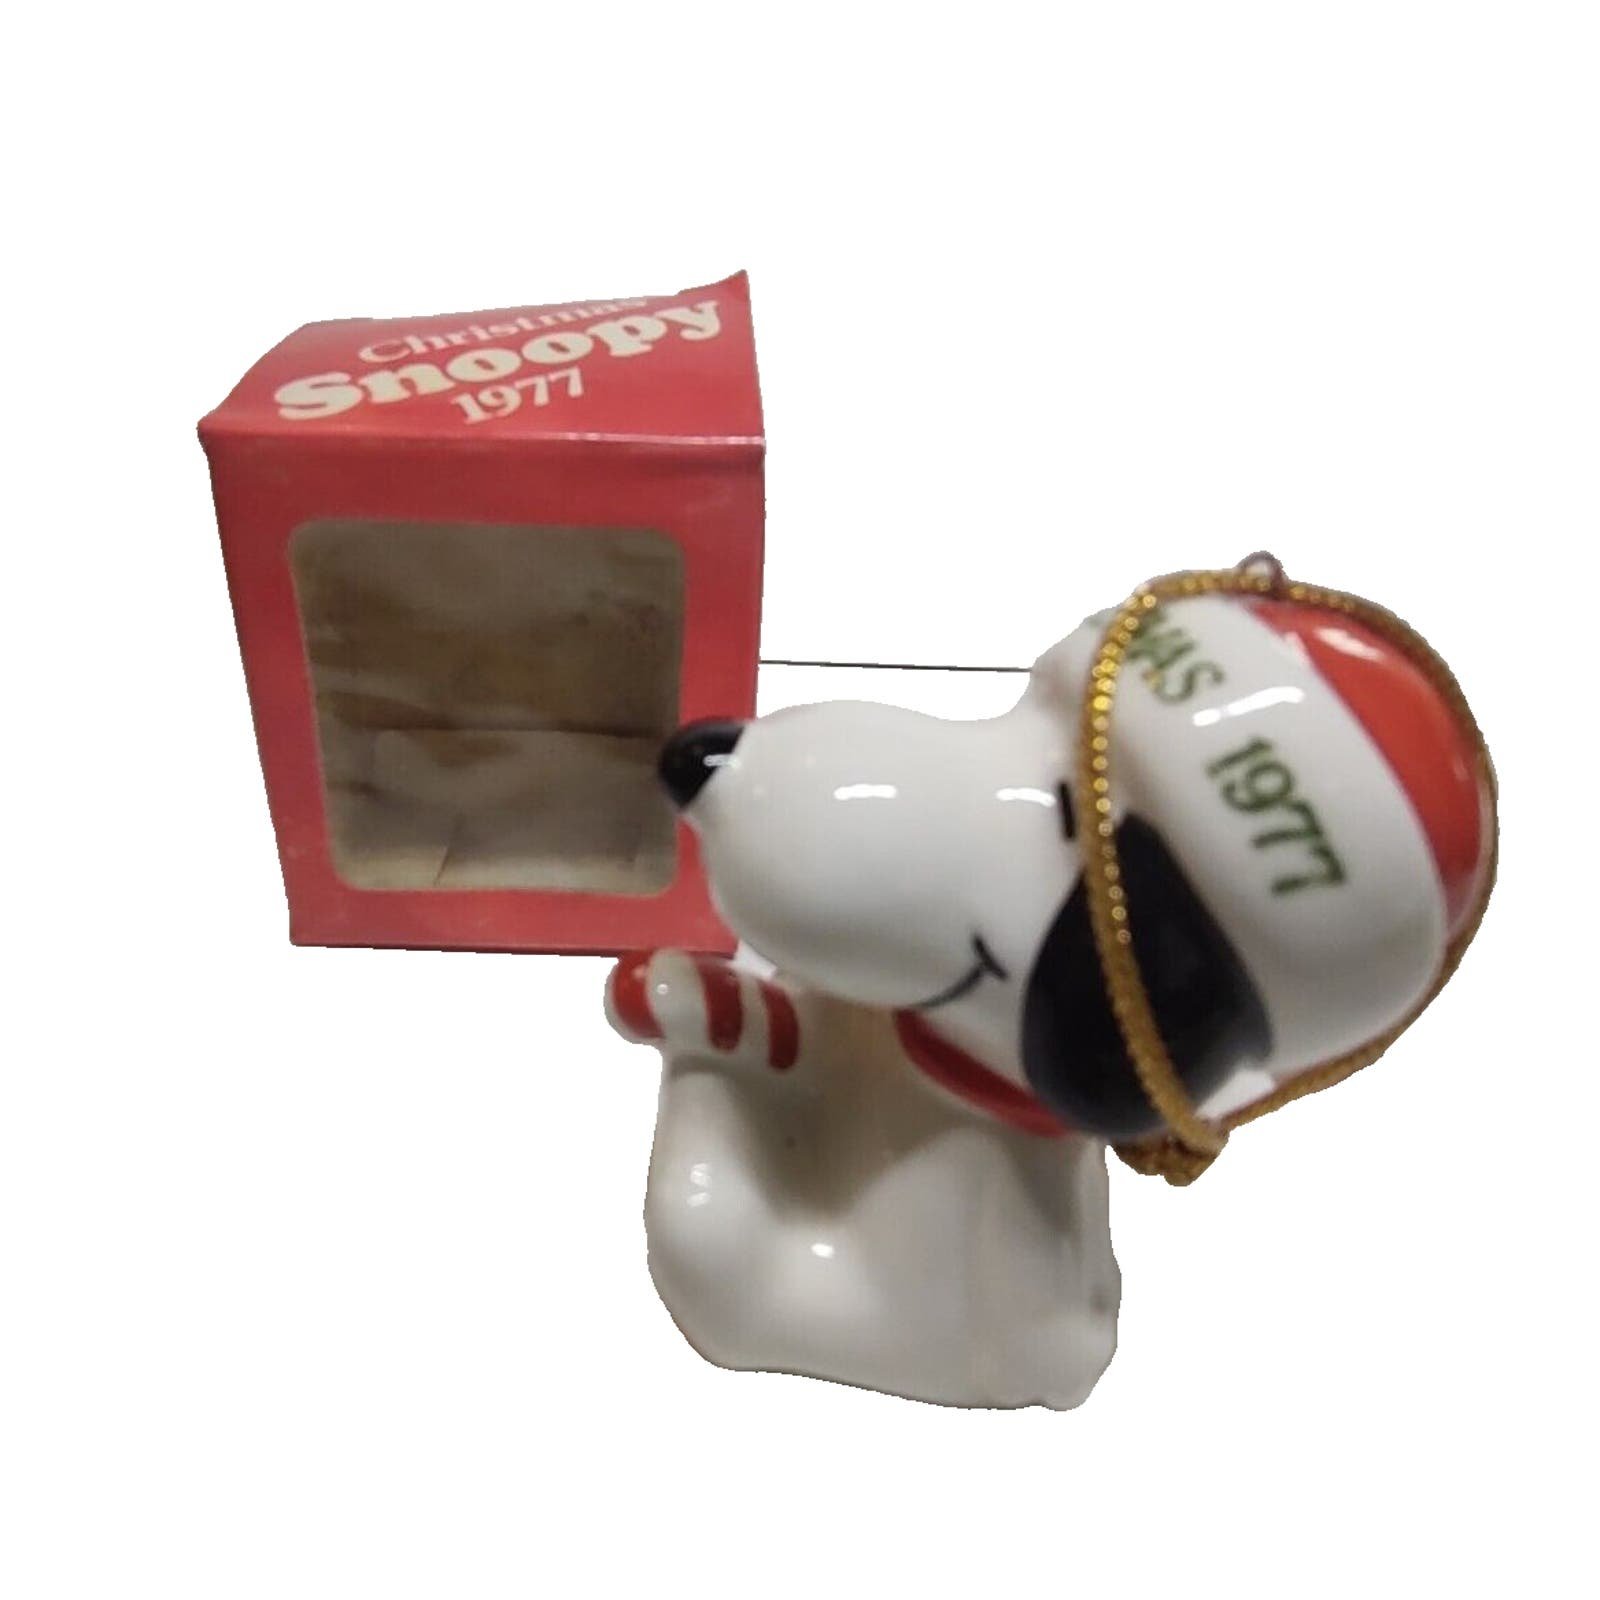 Snoopy Christmas Ornament 1977 Peanuts Gang Porcelain Candy Cane Dog With Box oU7VnH7Pt